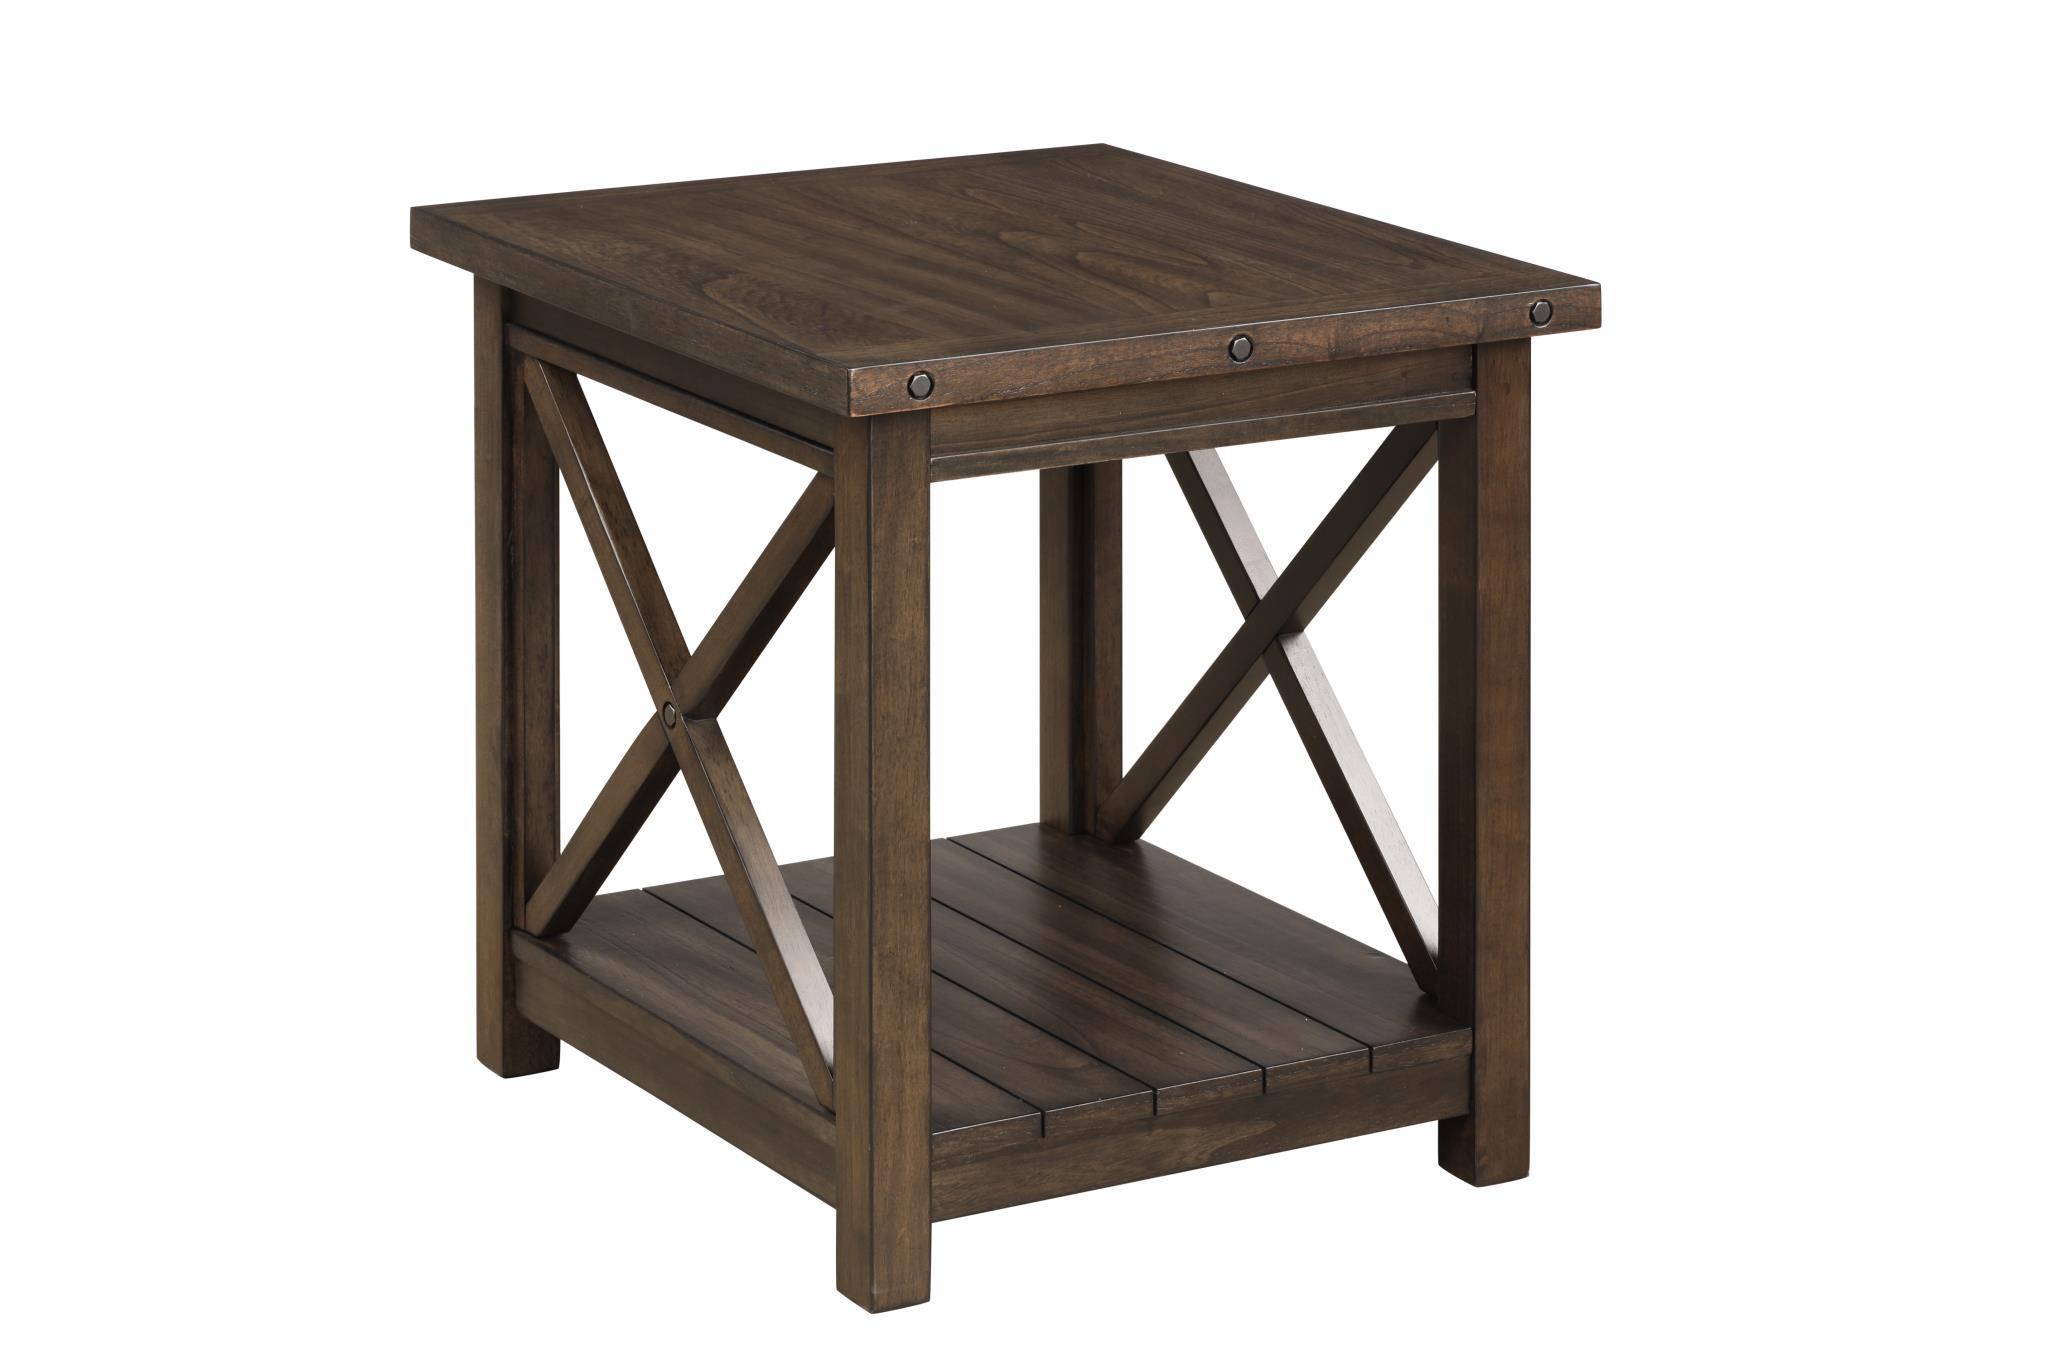 Contemporary, Transitional End Table JENSON 8632-002 8632-002 in Brown 